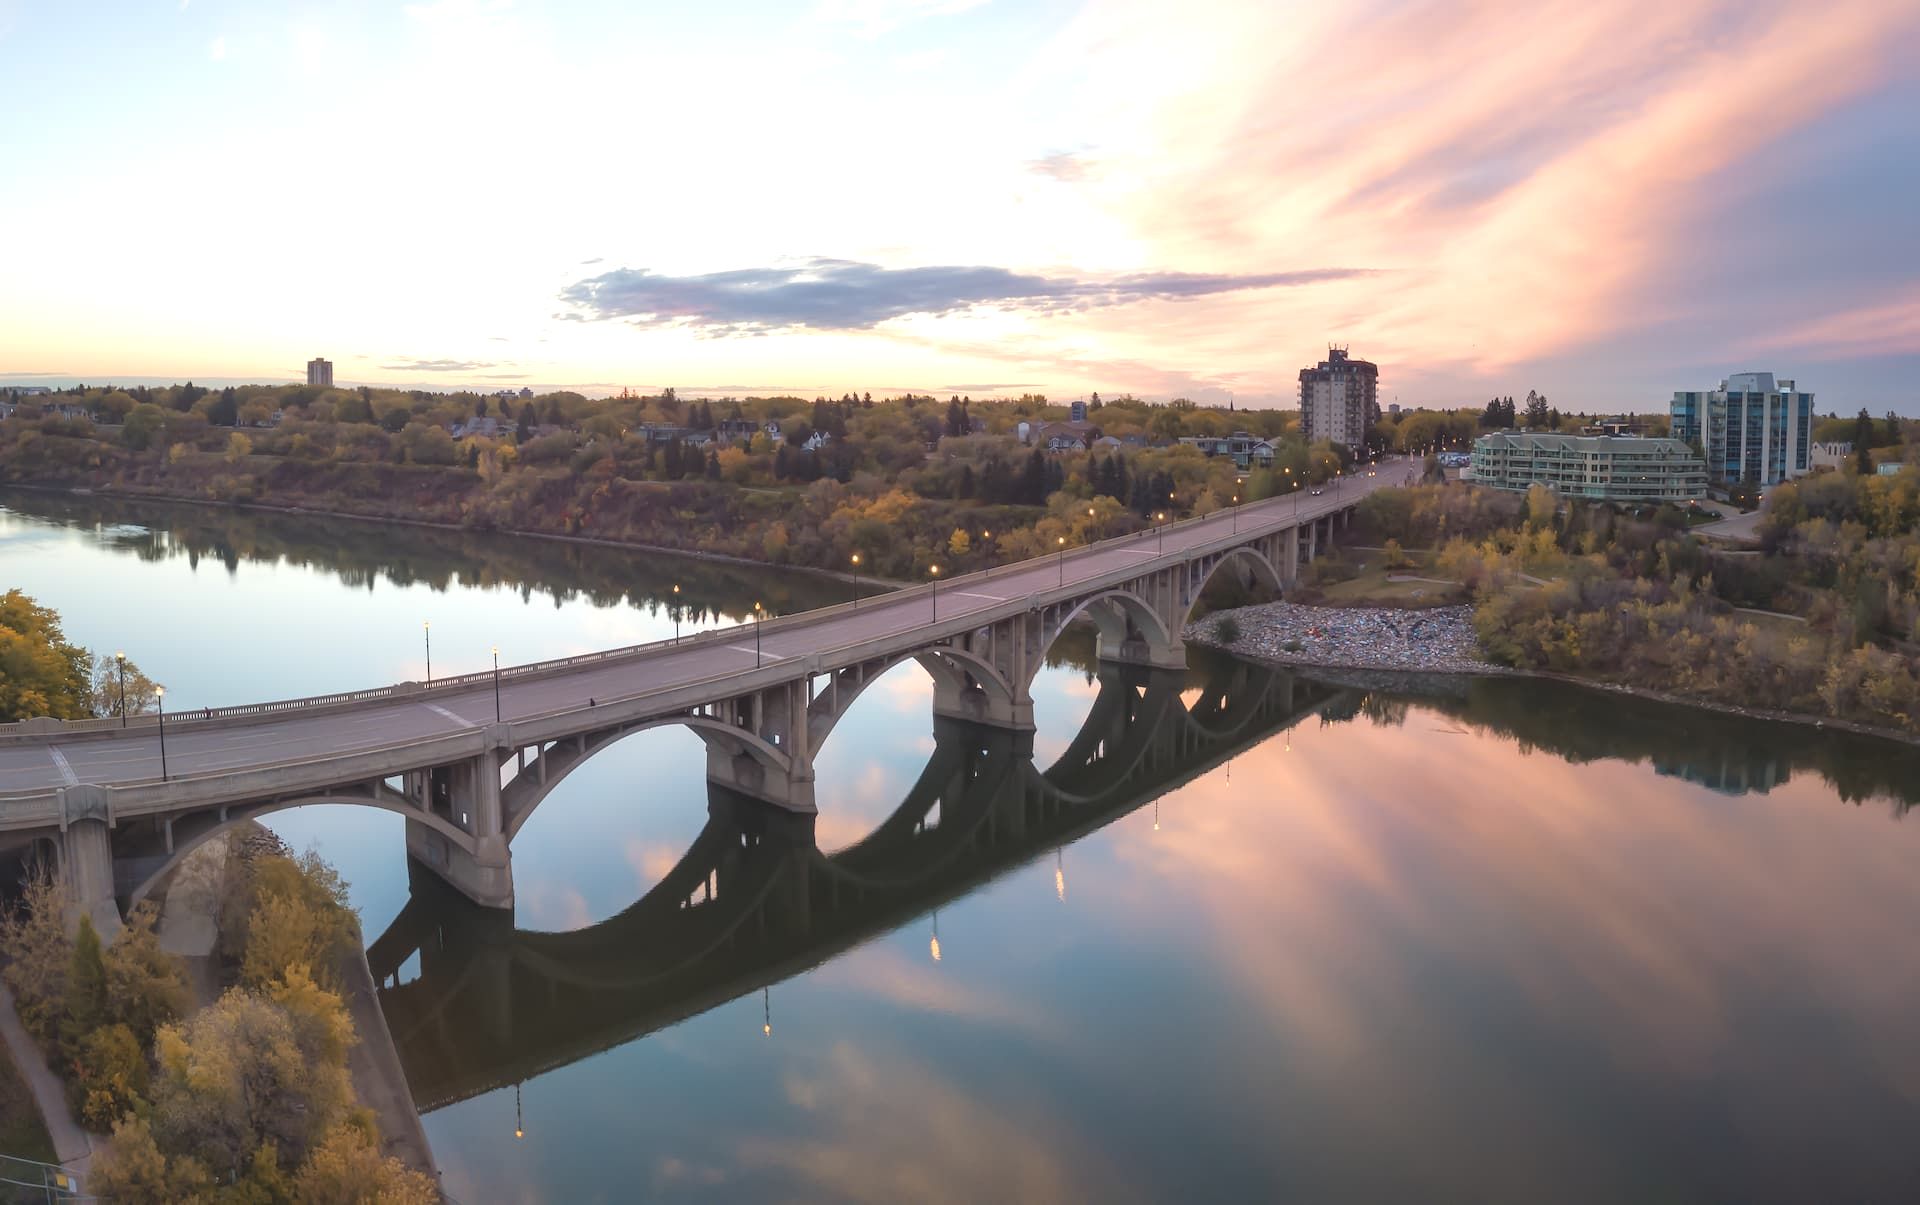 An aerial view of a bridge over a river at sunset.